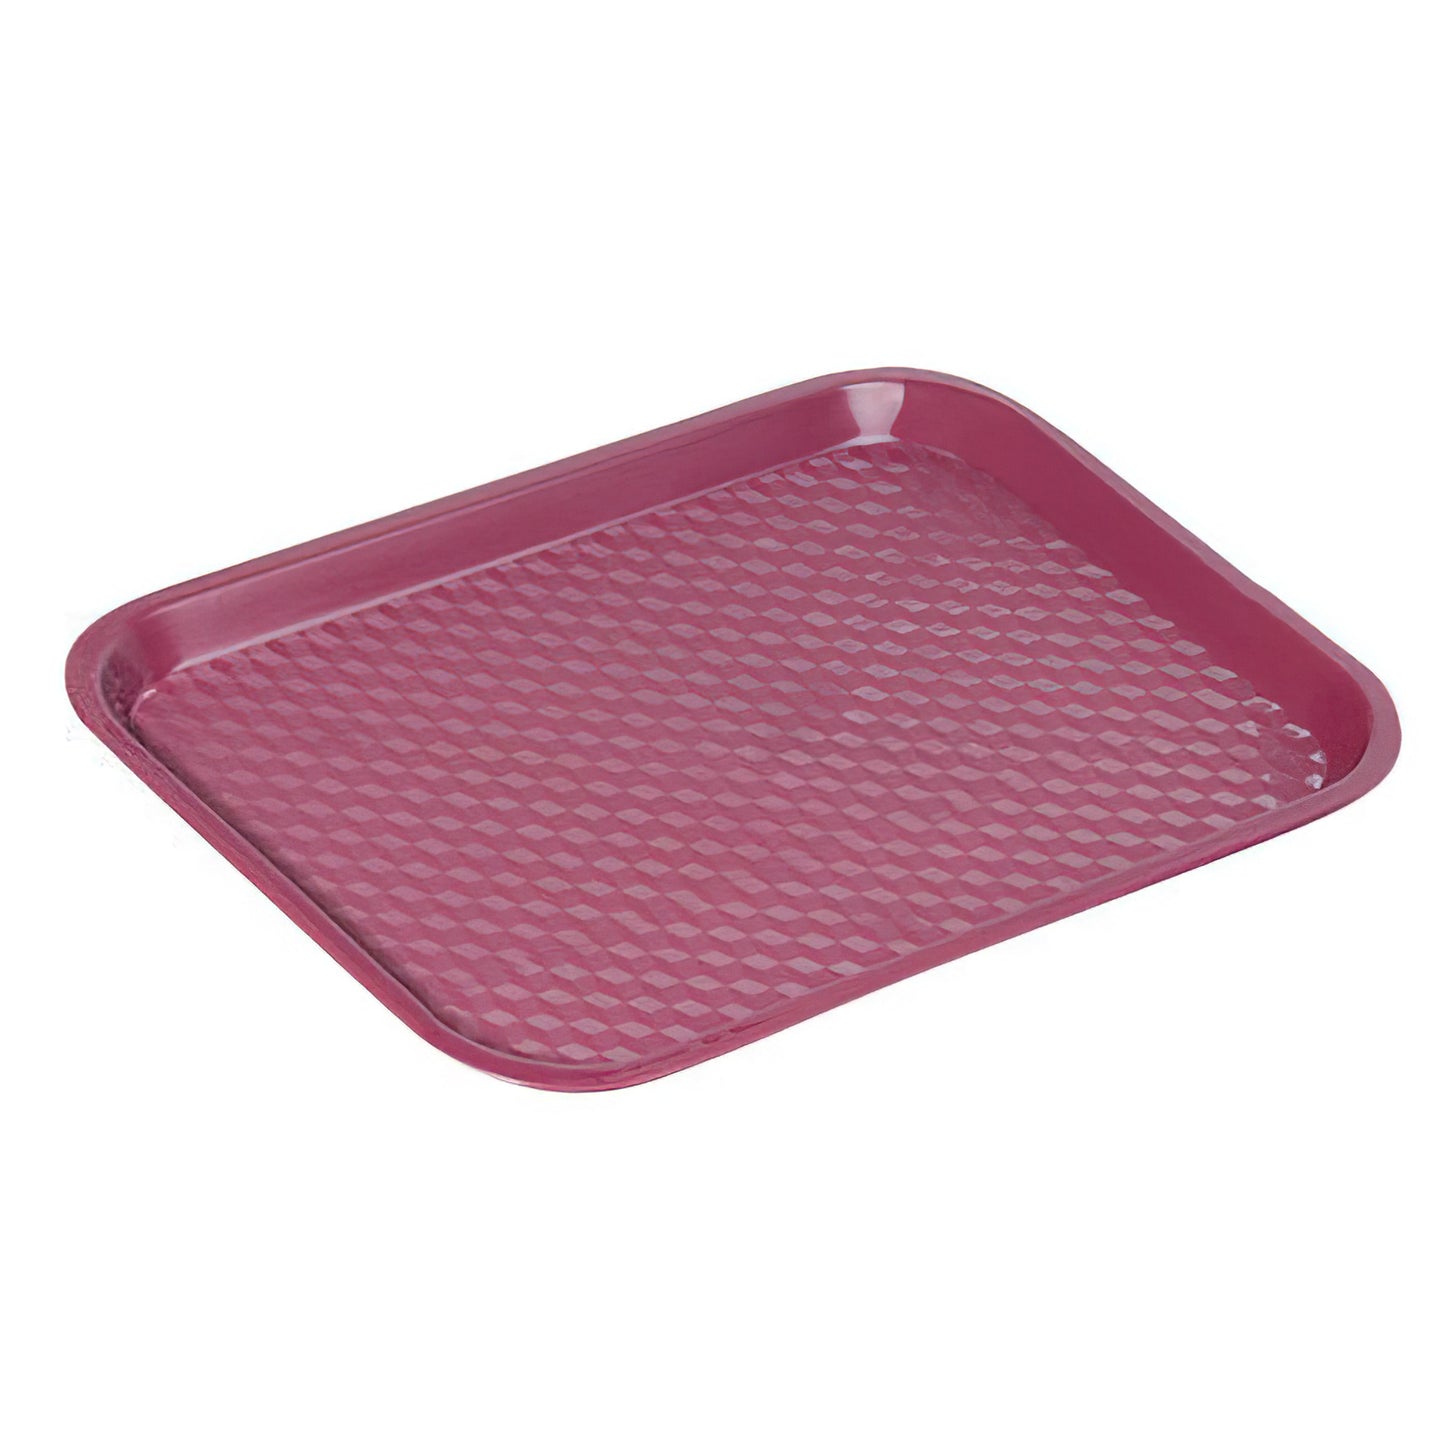 16.25" x 12" Fast Food Tray (12 Pack)